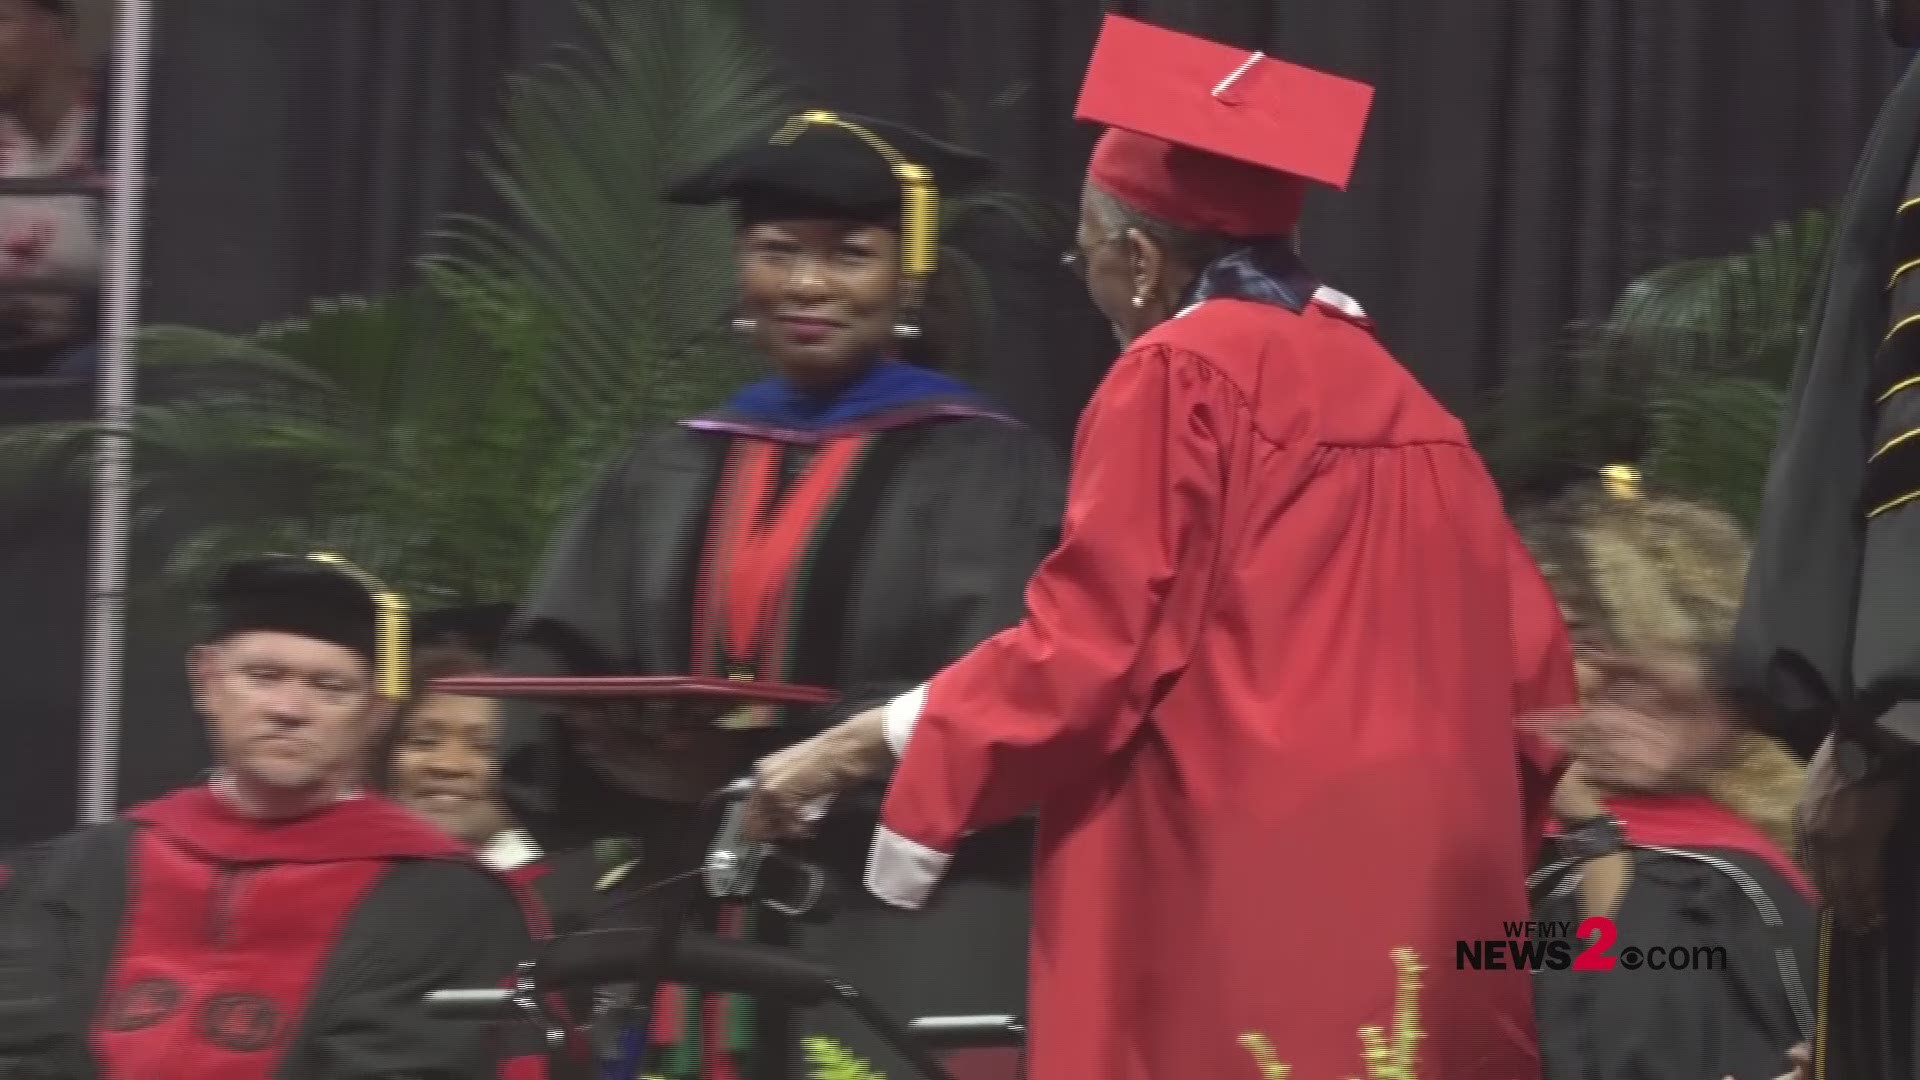 It's a moment that’s 70 years in the making. 99-year-old Elizabeth Johnson, a WWII veteran, will get to walk across the stage at WSSU's commencement and receive the degree she earned in 1949.